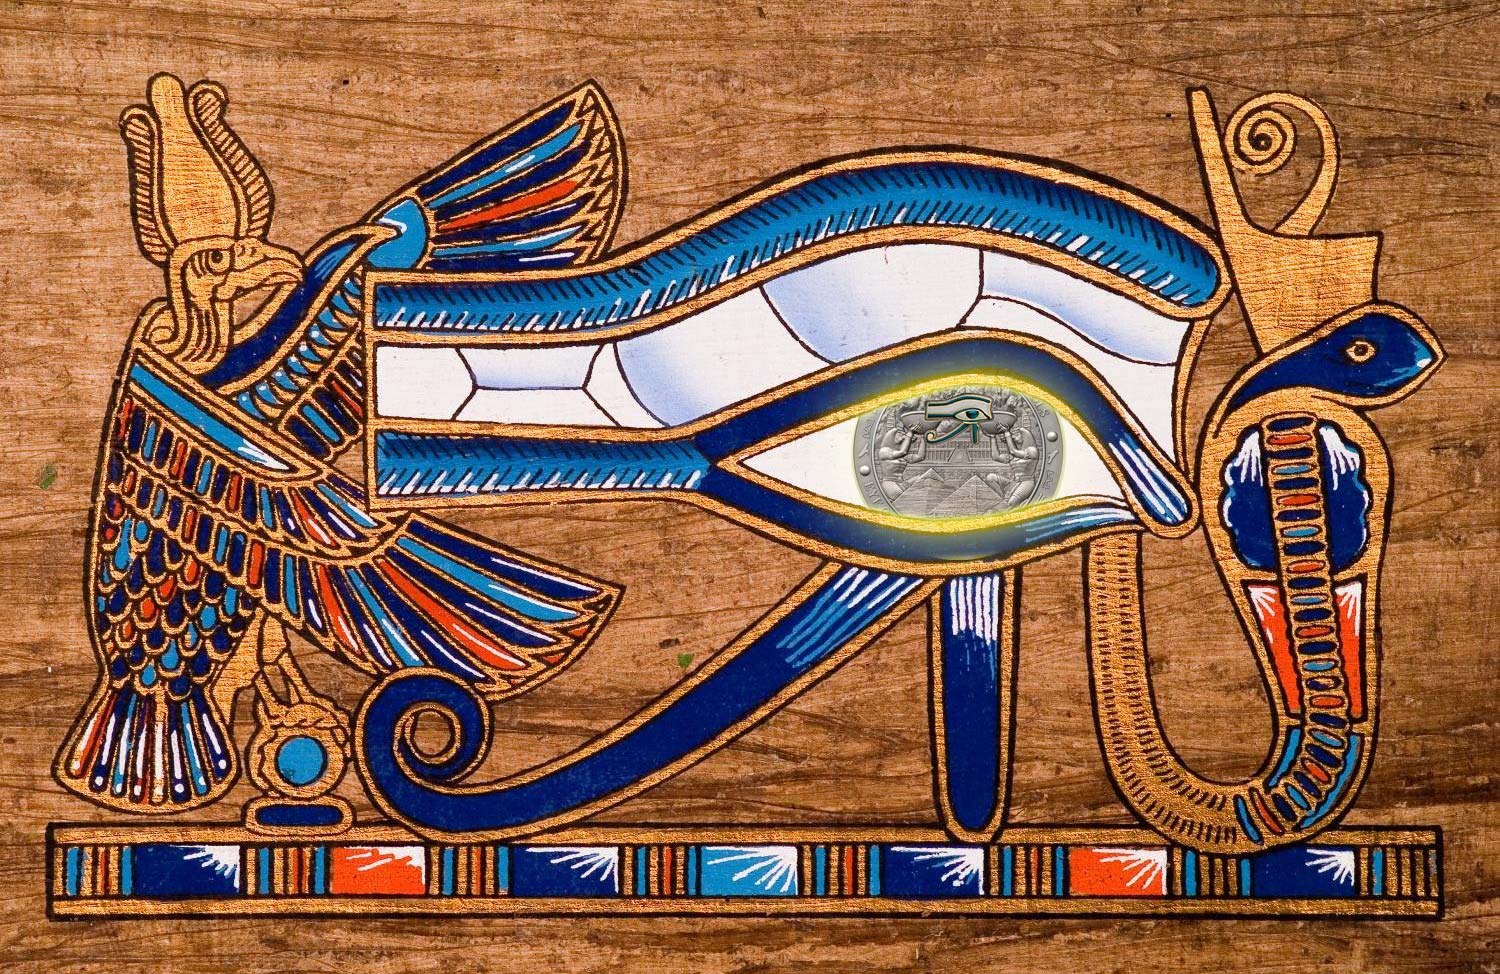 Egyptian Symbols: Eye of Horus maintains the high standard of last years Ankh coin